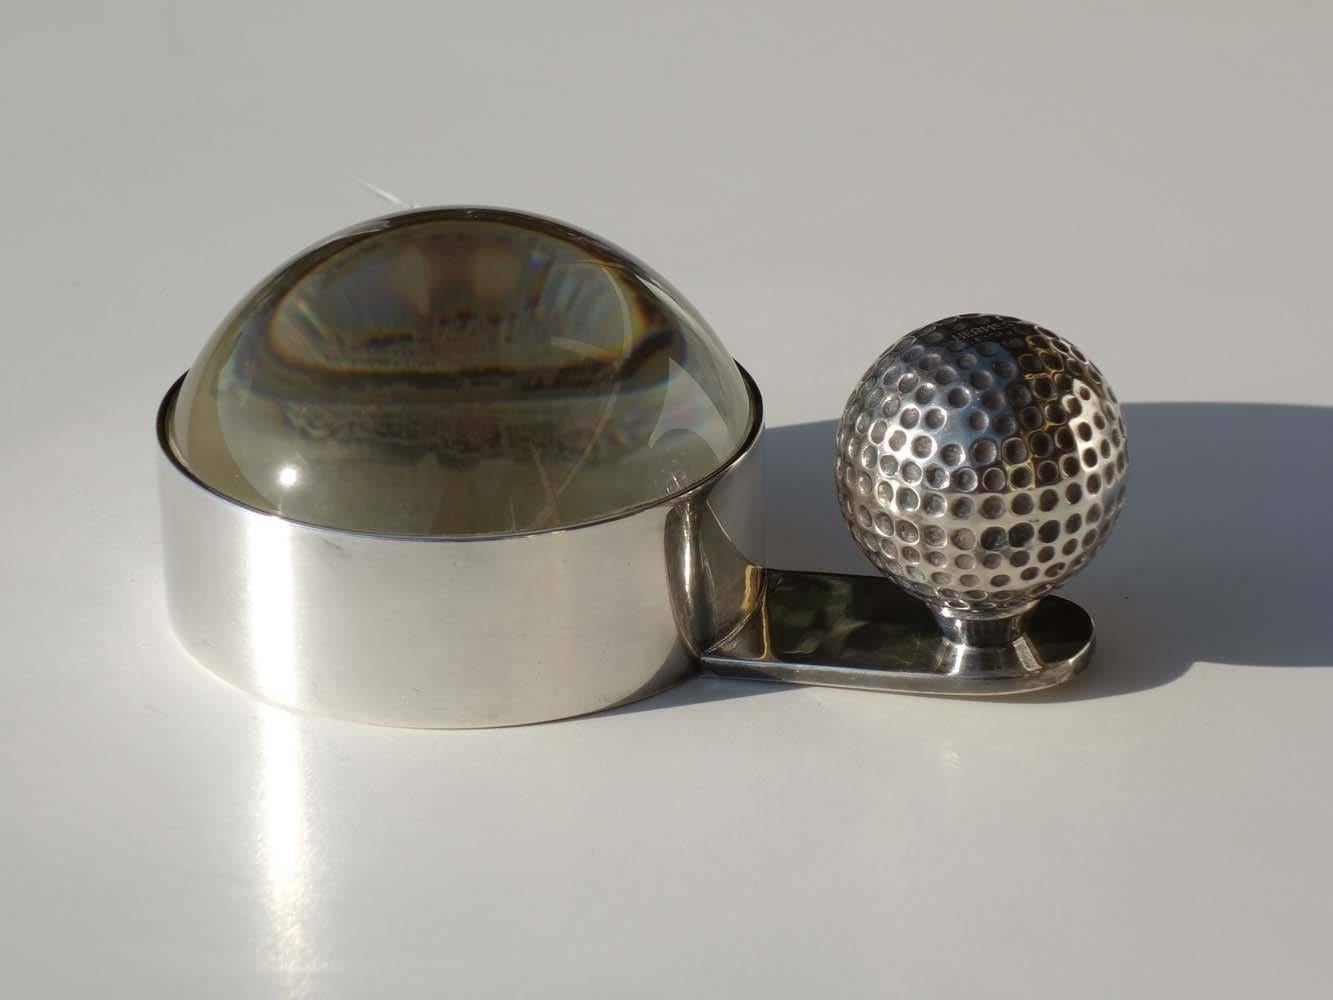 Silver plated and glass magnifying
Excellent condition.